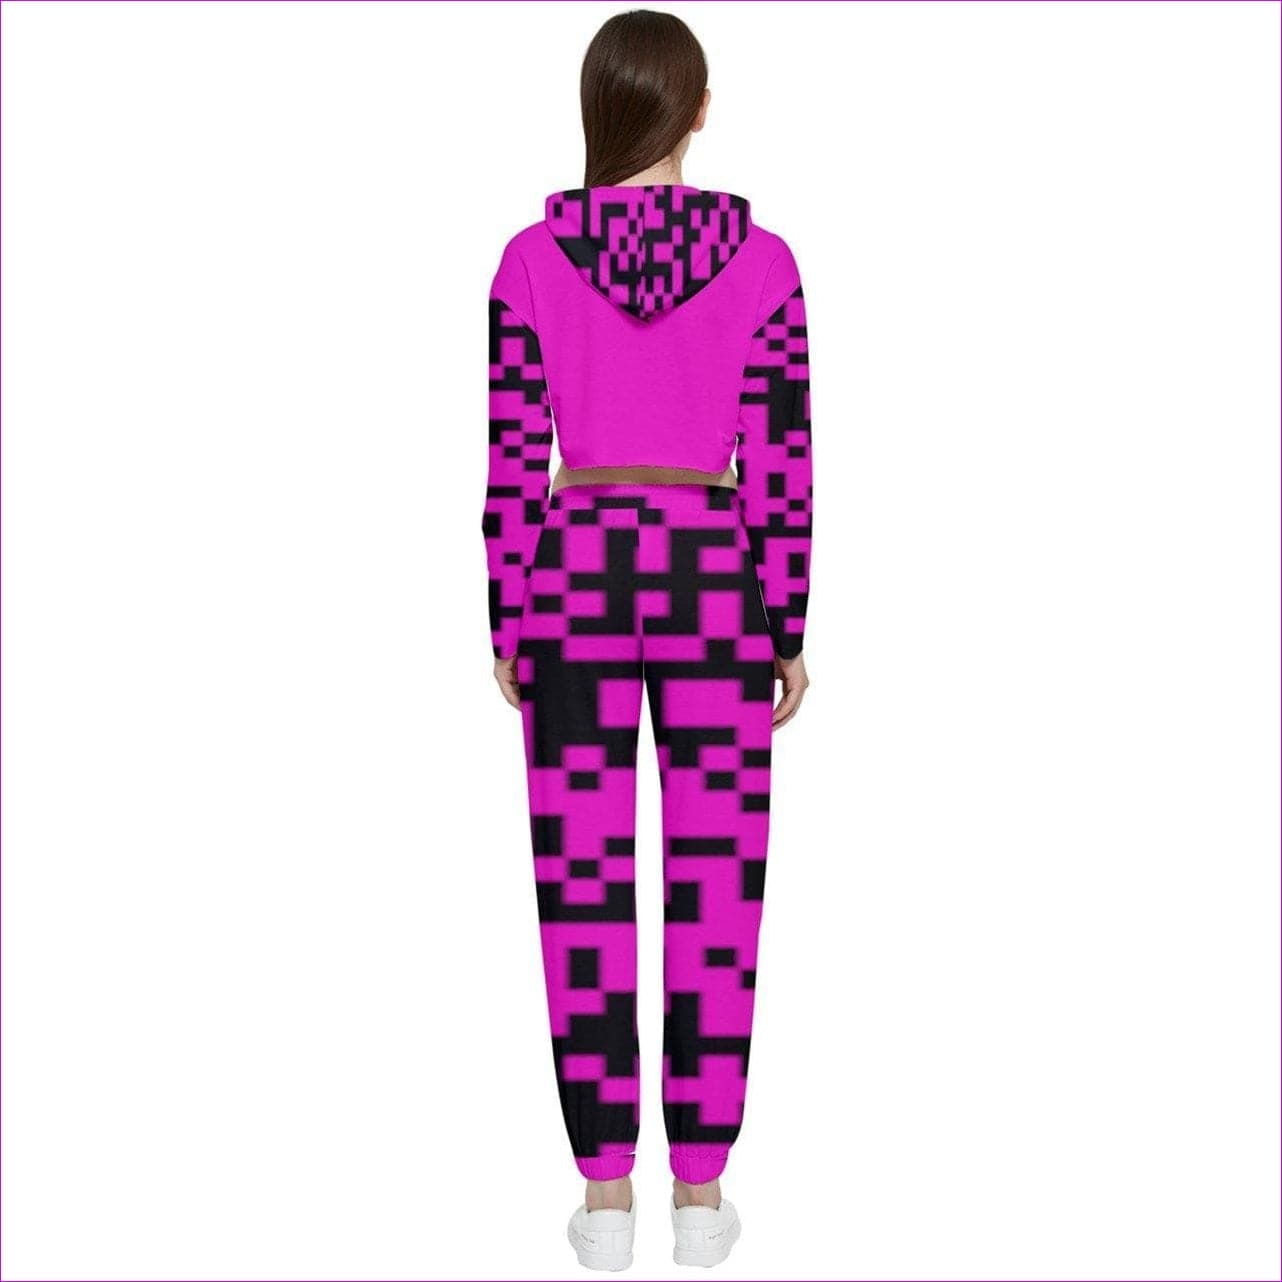 pink Code Clothing Cropped Zip Up Lounge Set - 5 colors - women's jogging set at TFC&H Co.